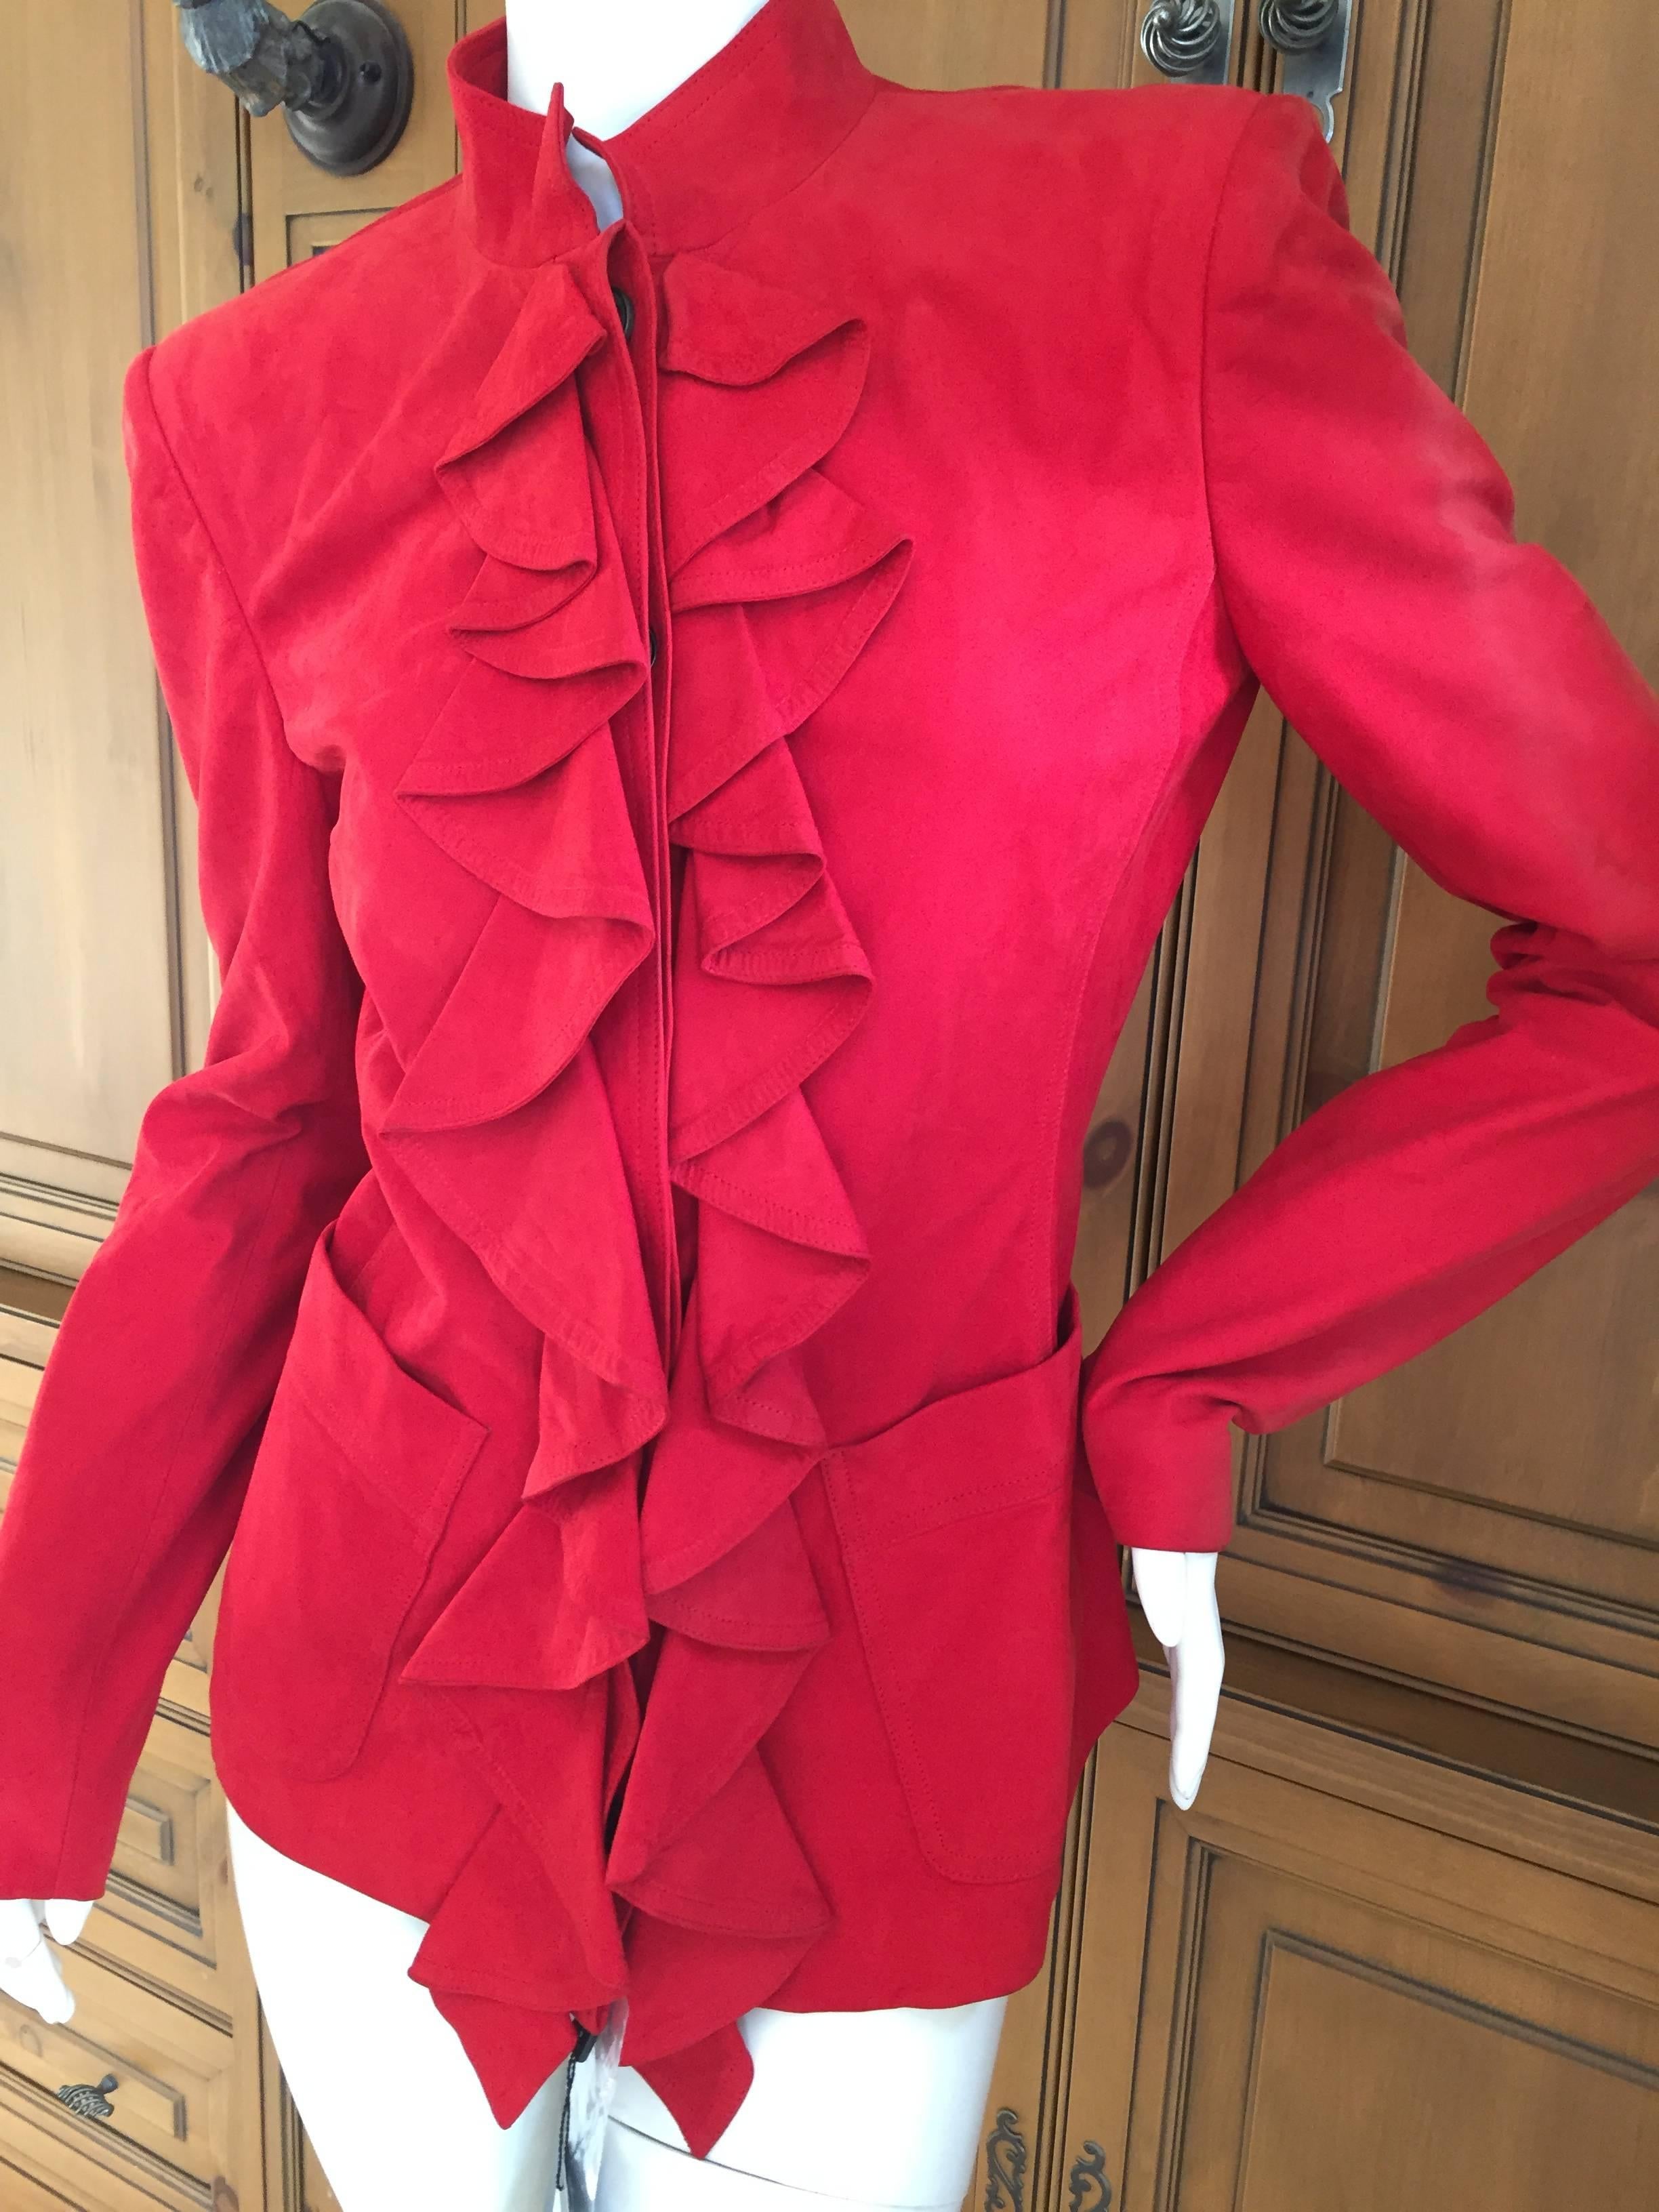 Yves Saint Laurent by Tom Ford Red Suede Ruffle Front Jacket 
Unworn with tags, $2995
From  Fall 2003
Size 38